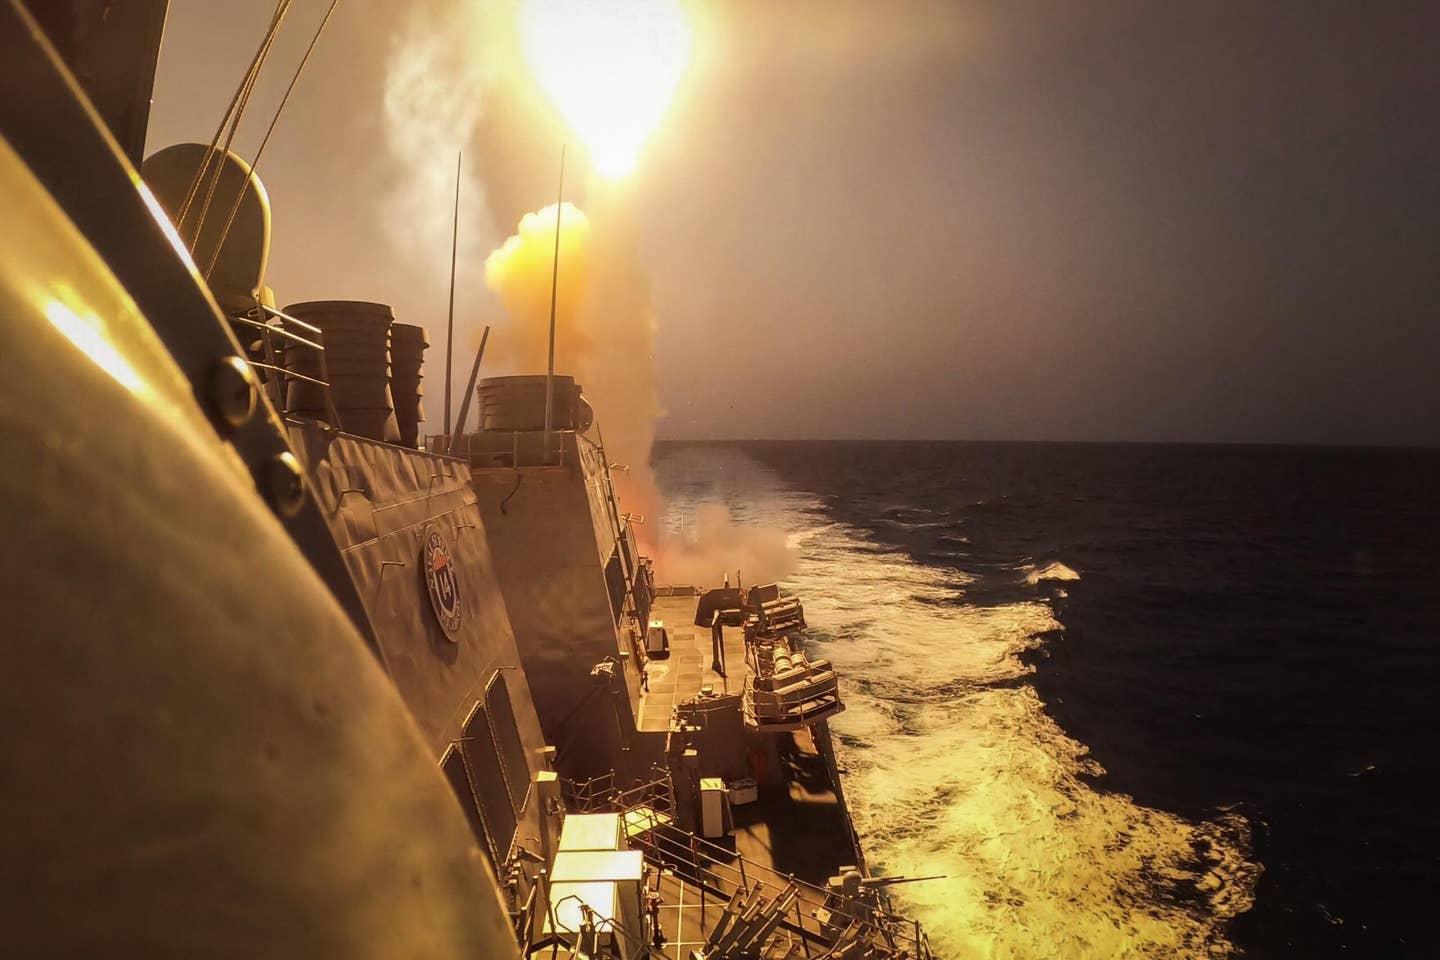 The <em>Arleigh Burke</em> class guided-missile destroyer USS<em> Carney</em> defeated a combination of Houthi missiles and unmanned aerial vehicles in the Red Sea, Oct. 19. (U.S. Navy photo by Mass Communication Specialist 2nd Class Aaron Lau)